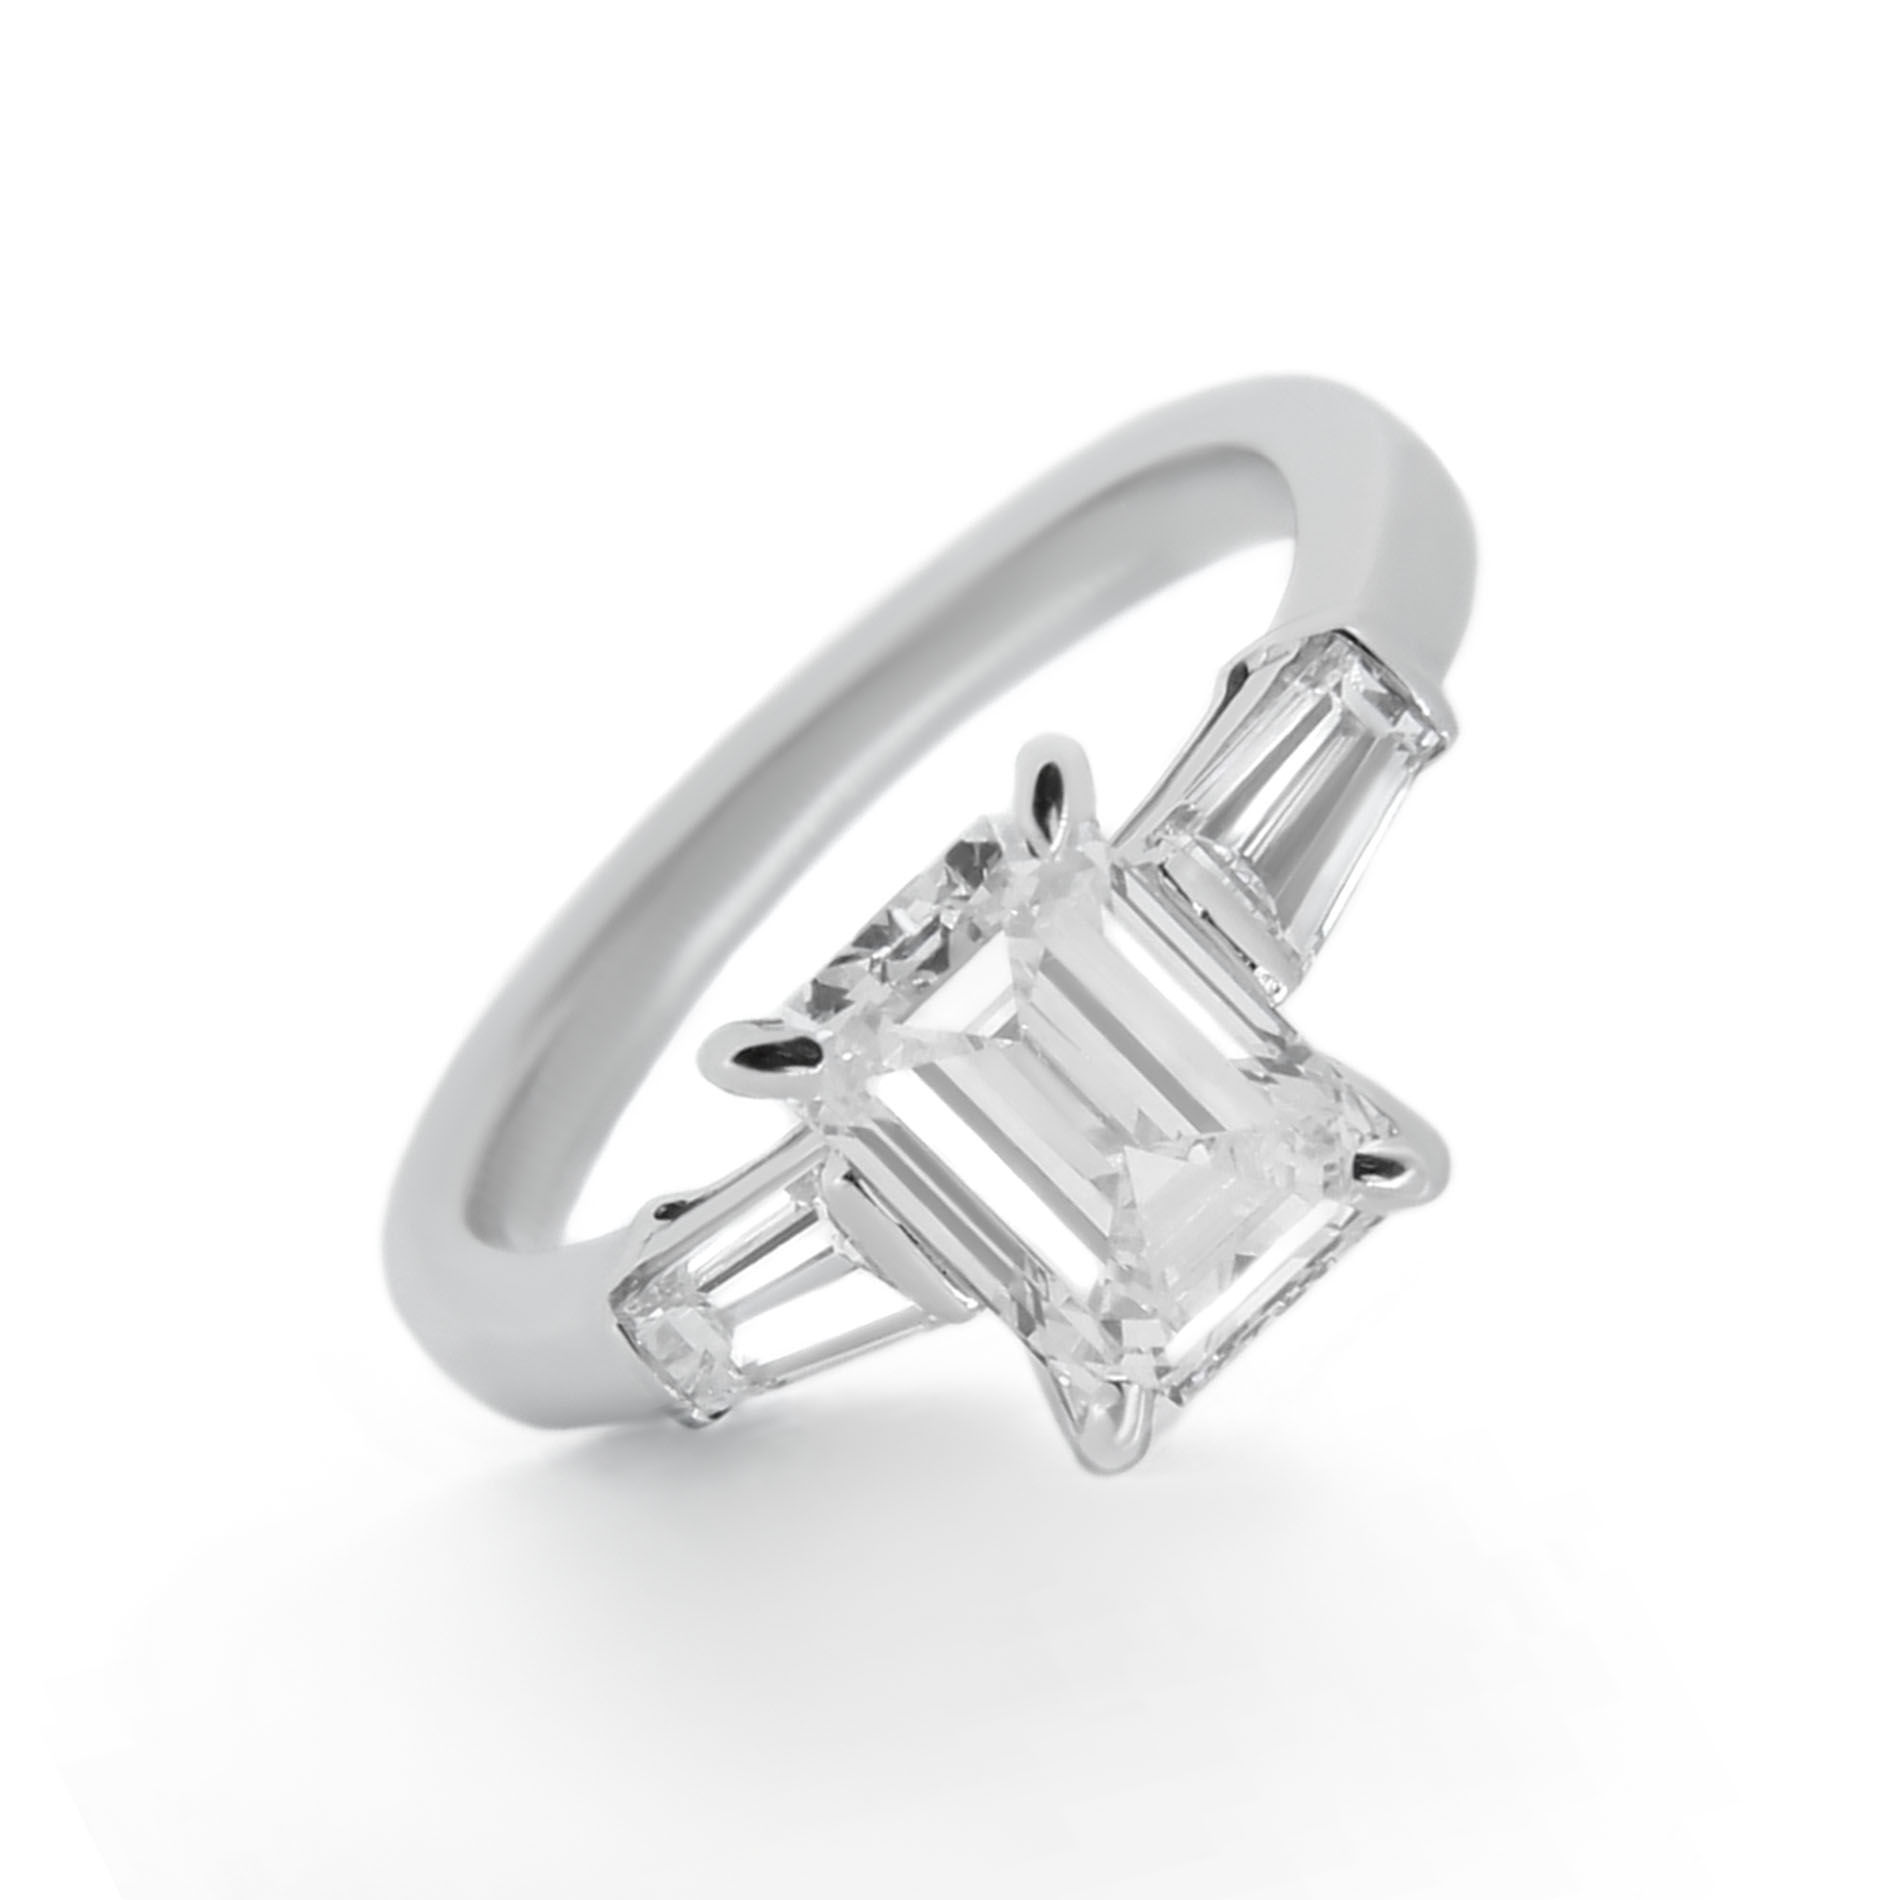 Emerald Cut Diamond Rings With Baguette Side Stones - Haywards of Hong Kong